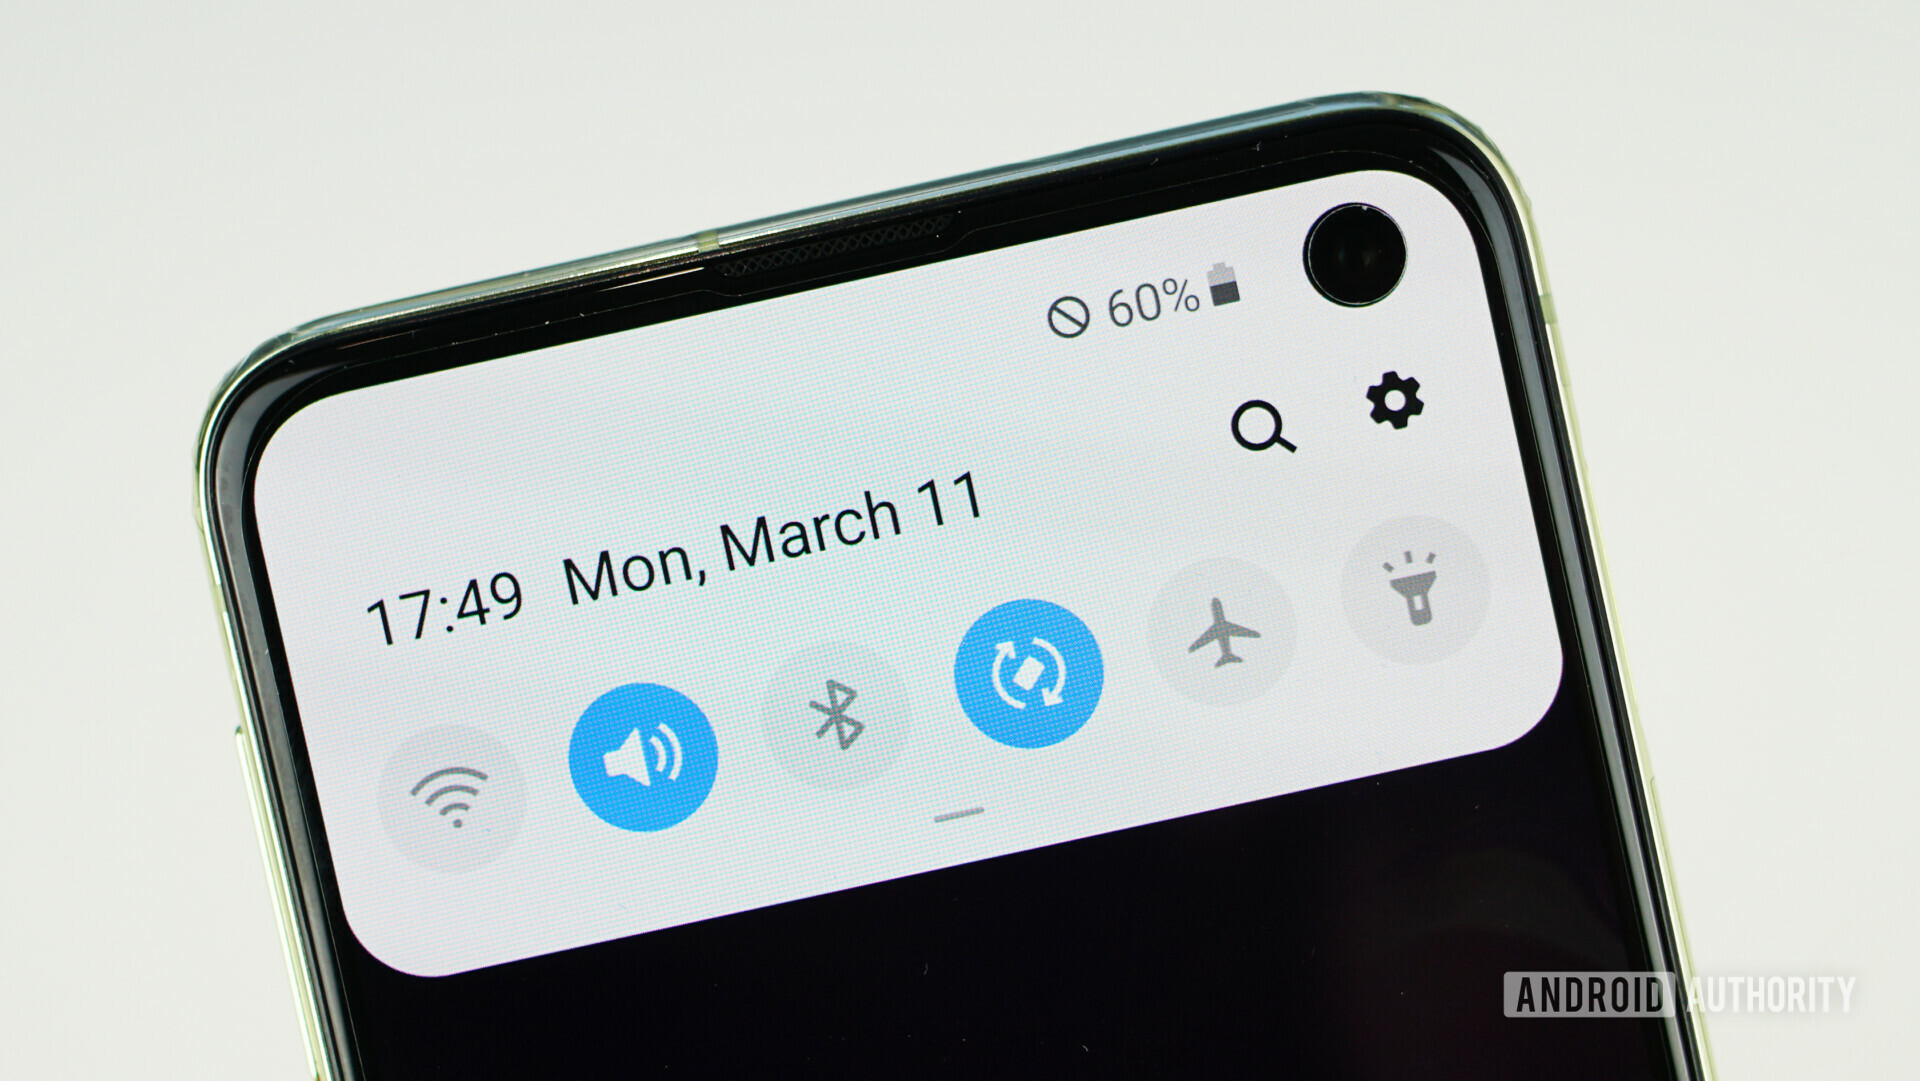 The Galaxy S10 series is the first major phone range to support Wi-Fi 6.